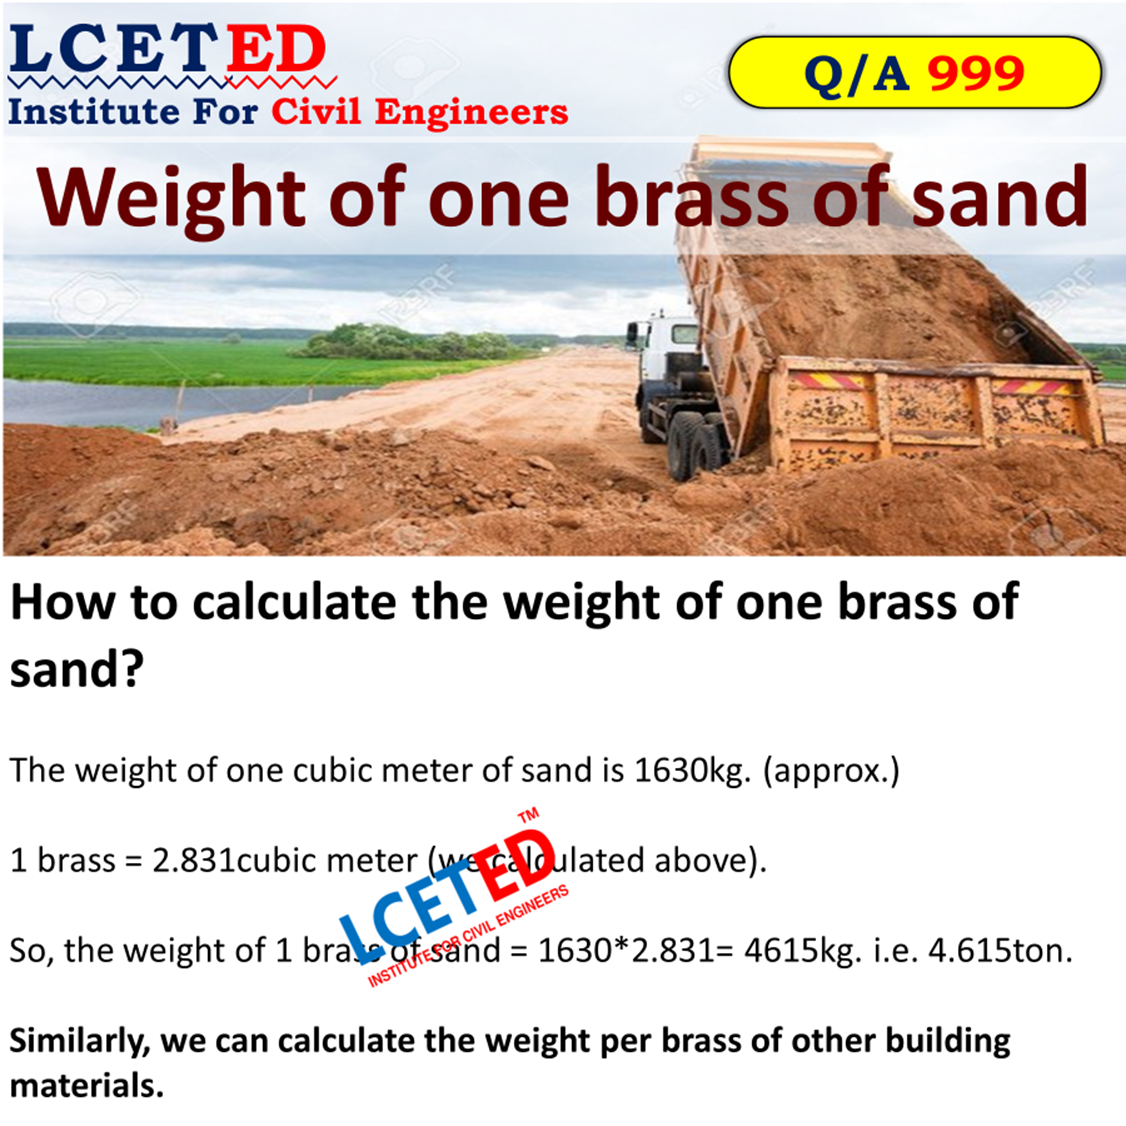 weight of one brass of sand